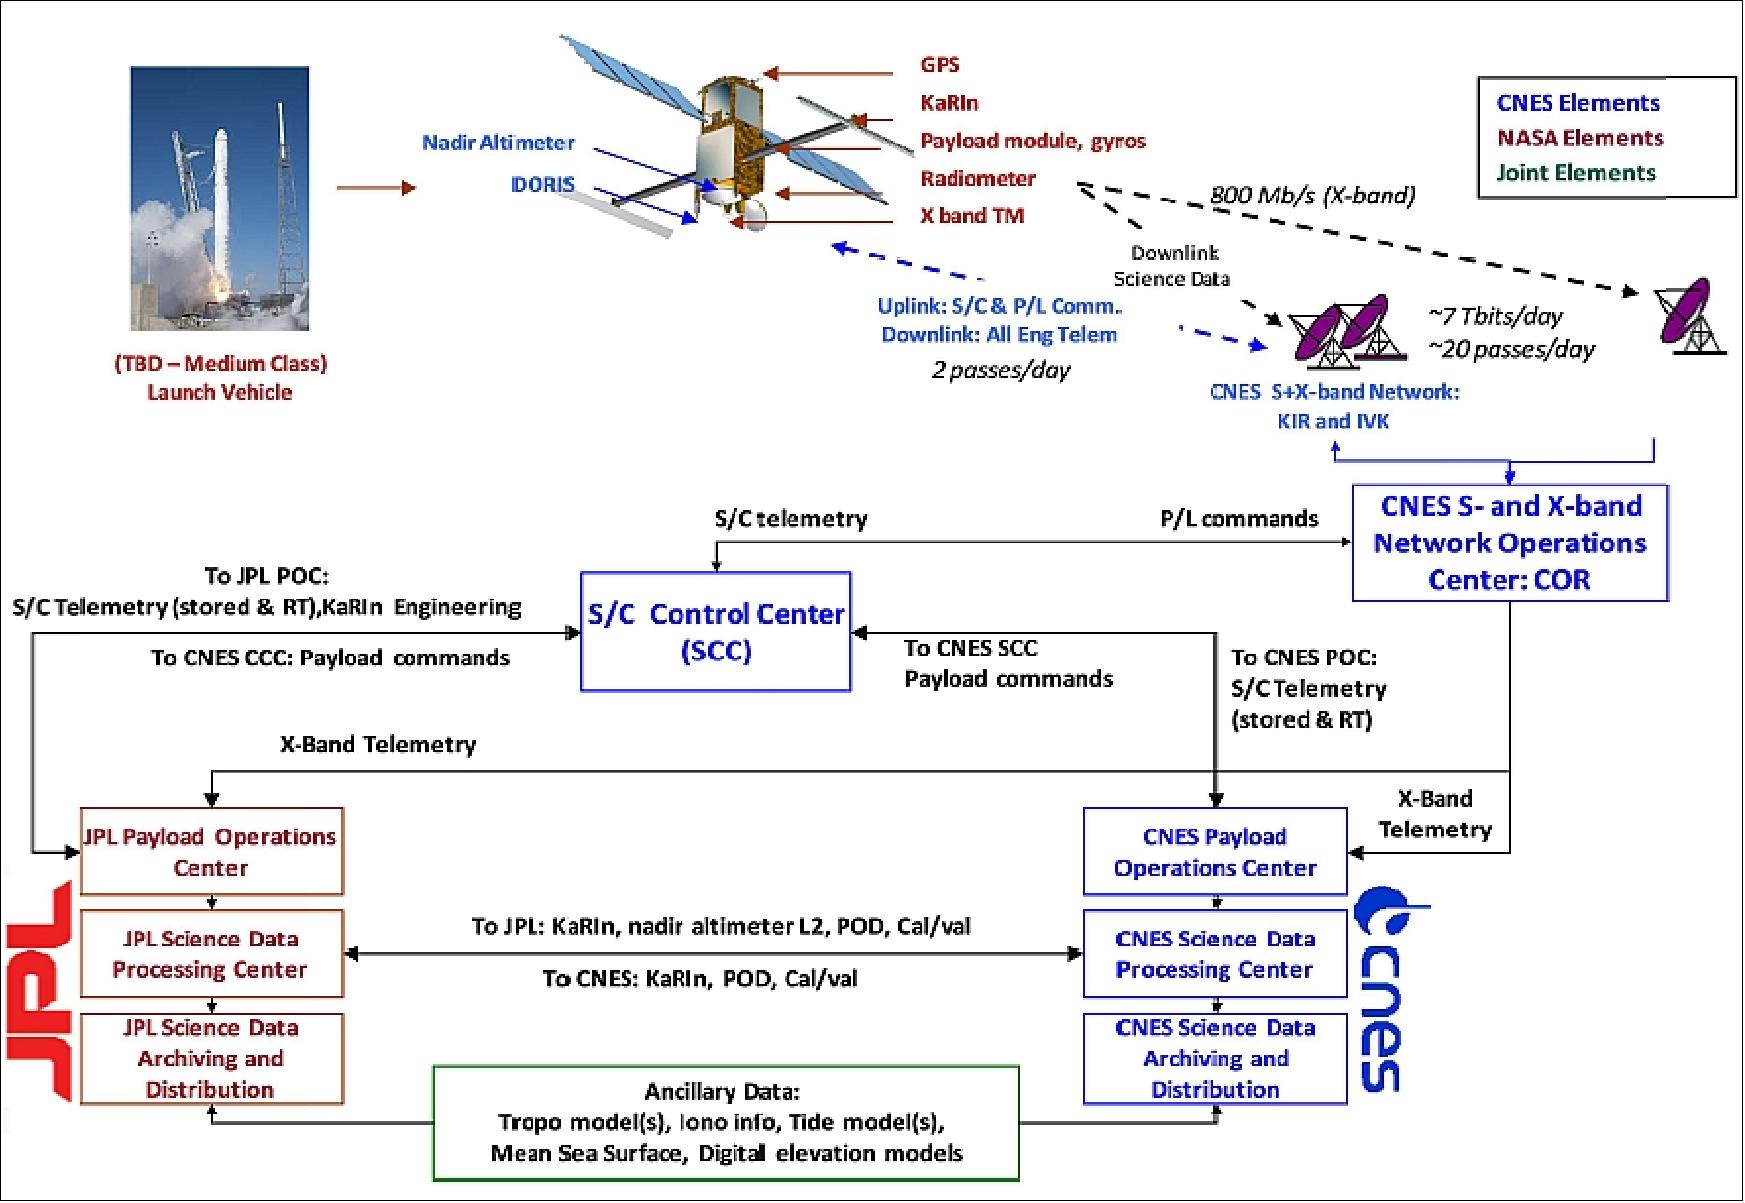 Figure 12: Overview of the mission architecture (image credit: NASA)